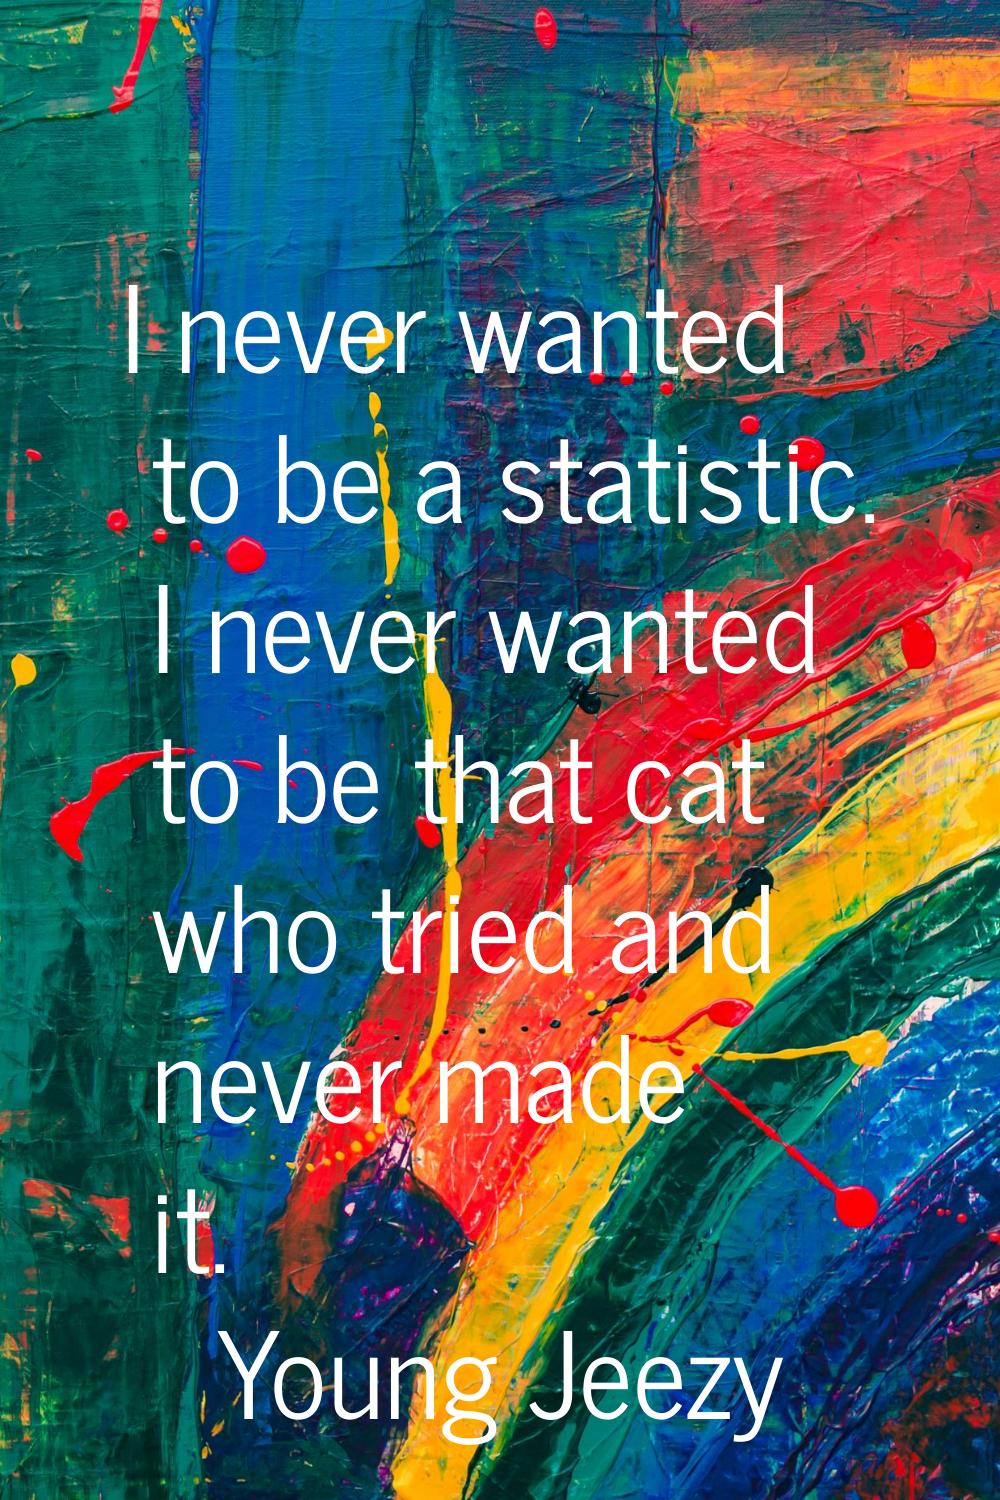 I never wanted to be a statistic. I never wanted to be that cat who tried and never made it.